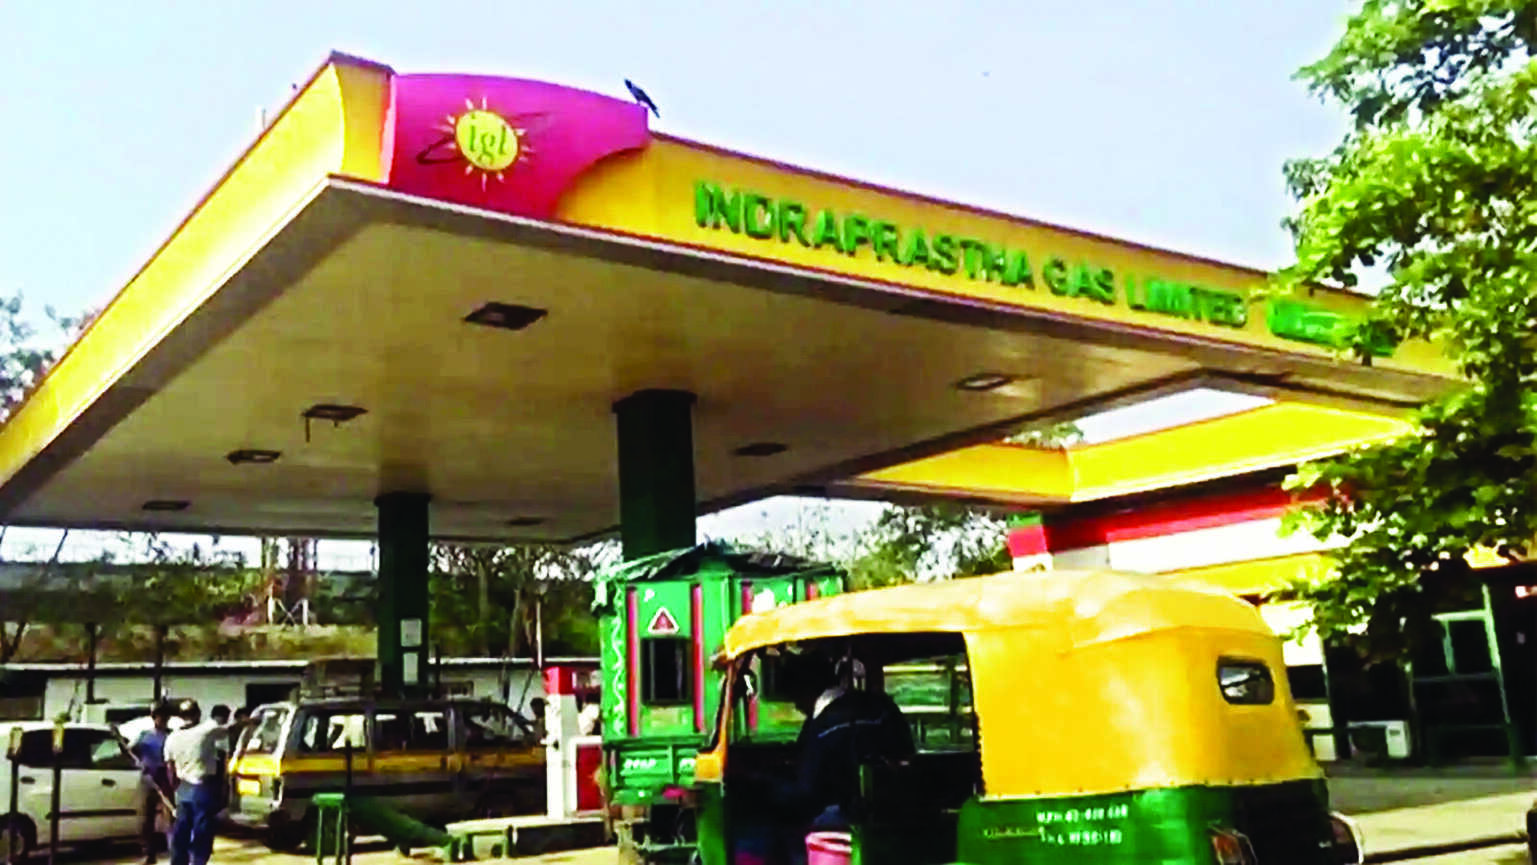 Record highs: CNG price up by Rs 2.5 per kg, piped cooking gas by Rs 4.25 per unit